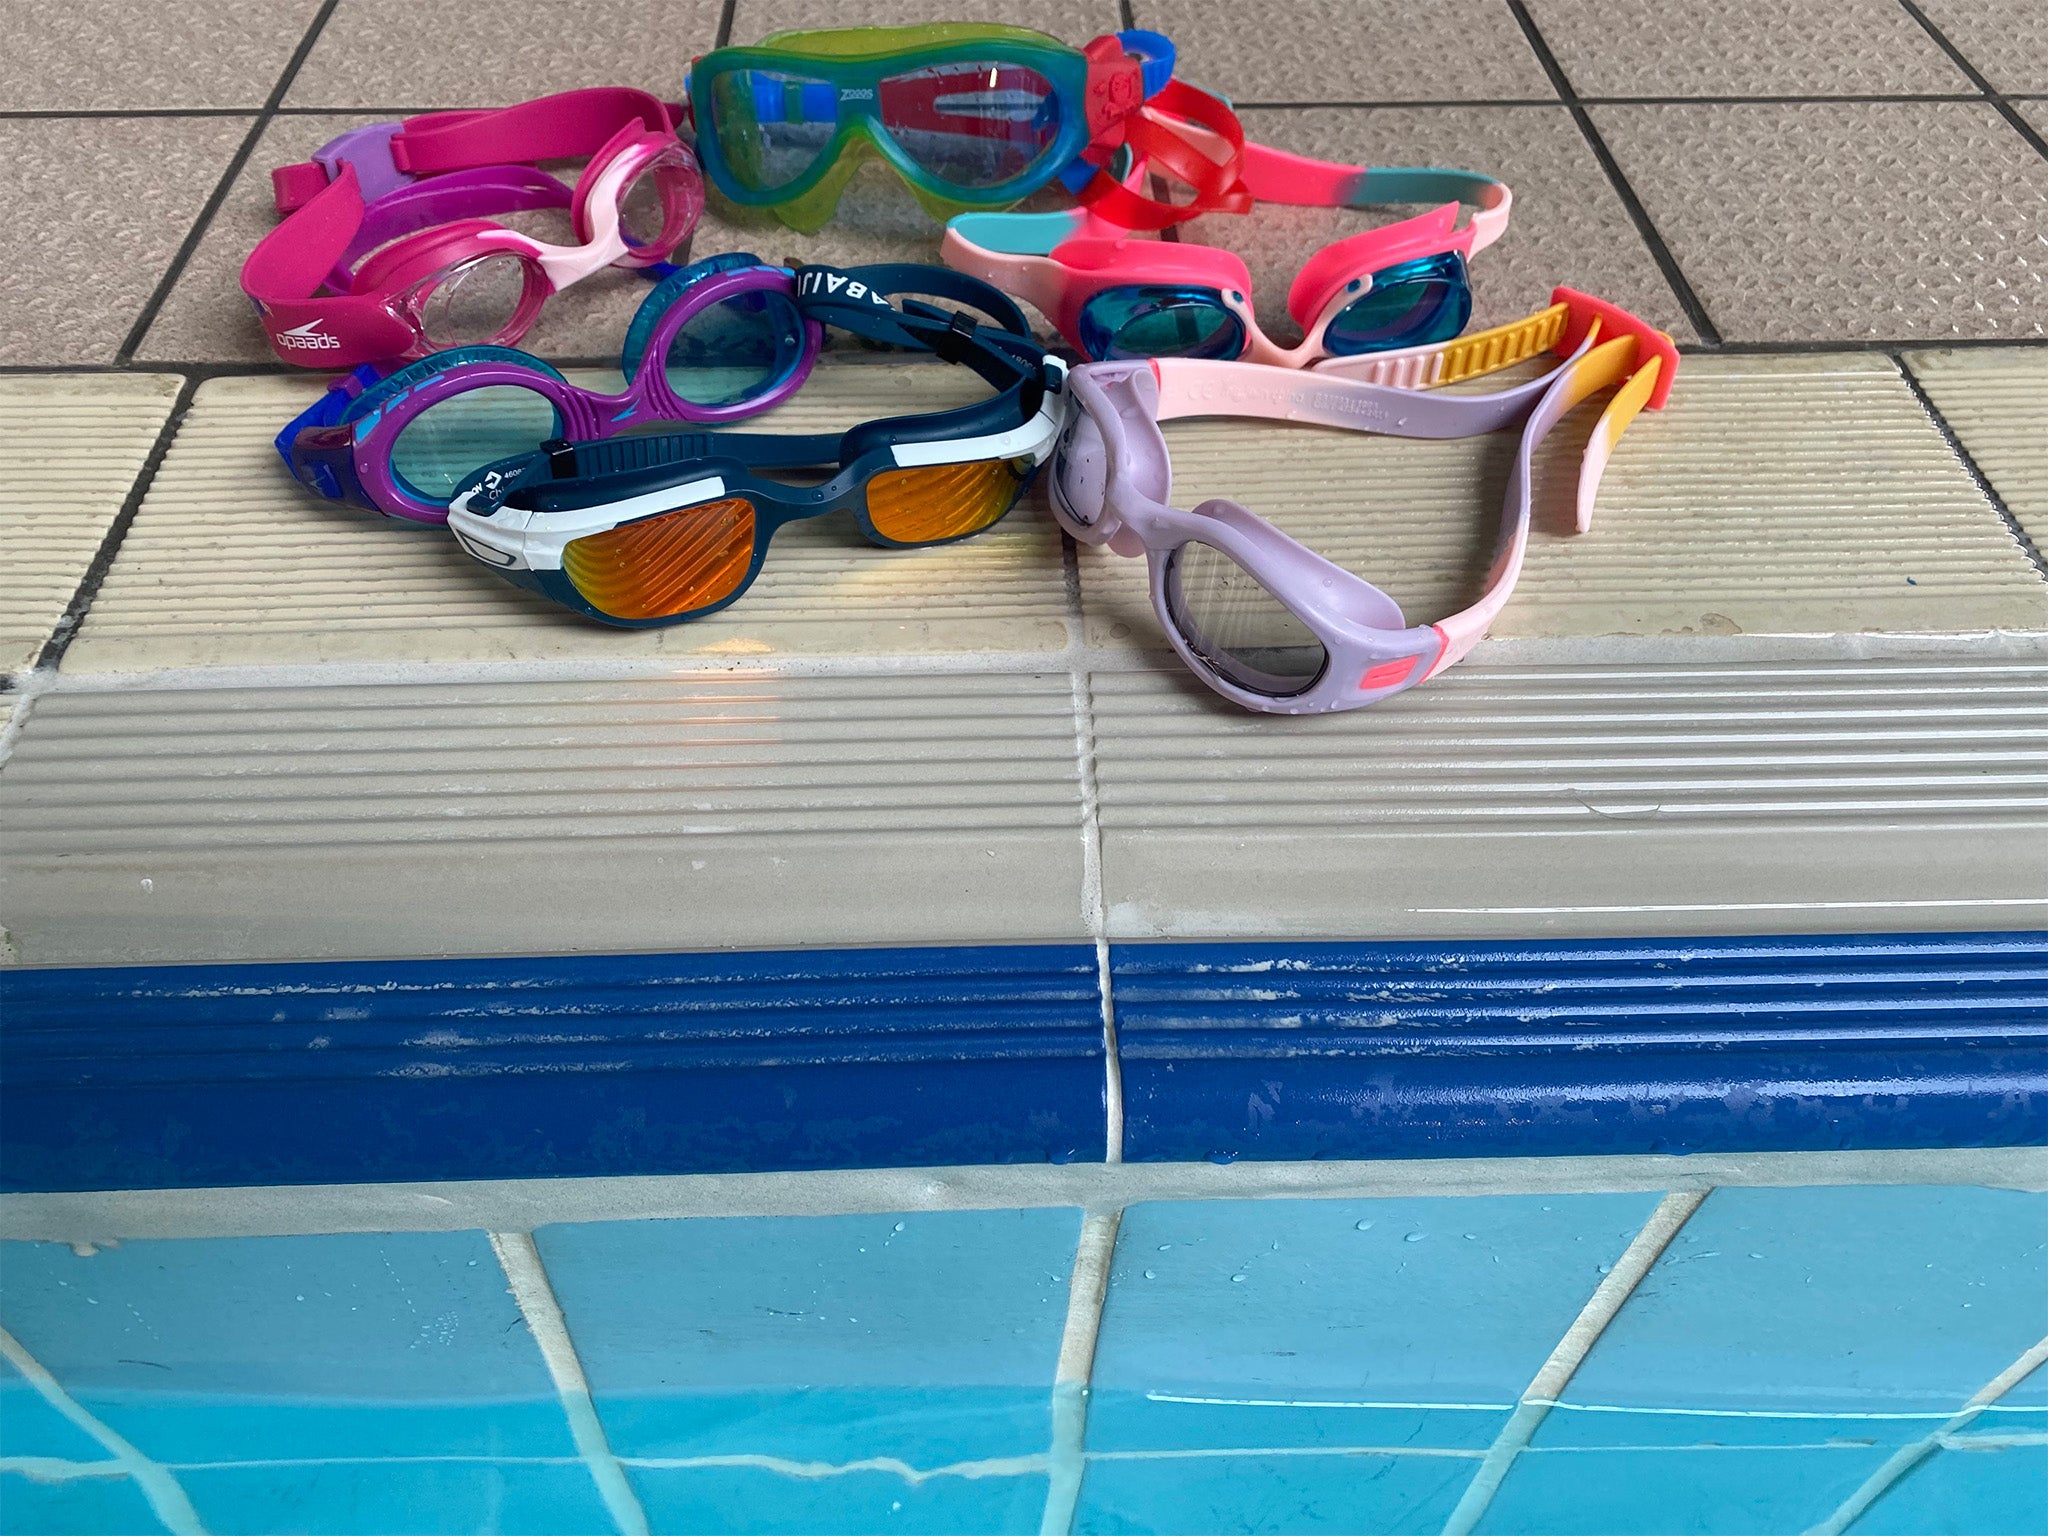 Swimmers of mixed abilities put the goggles through their paces